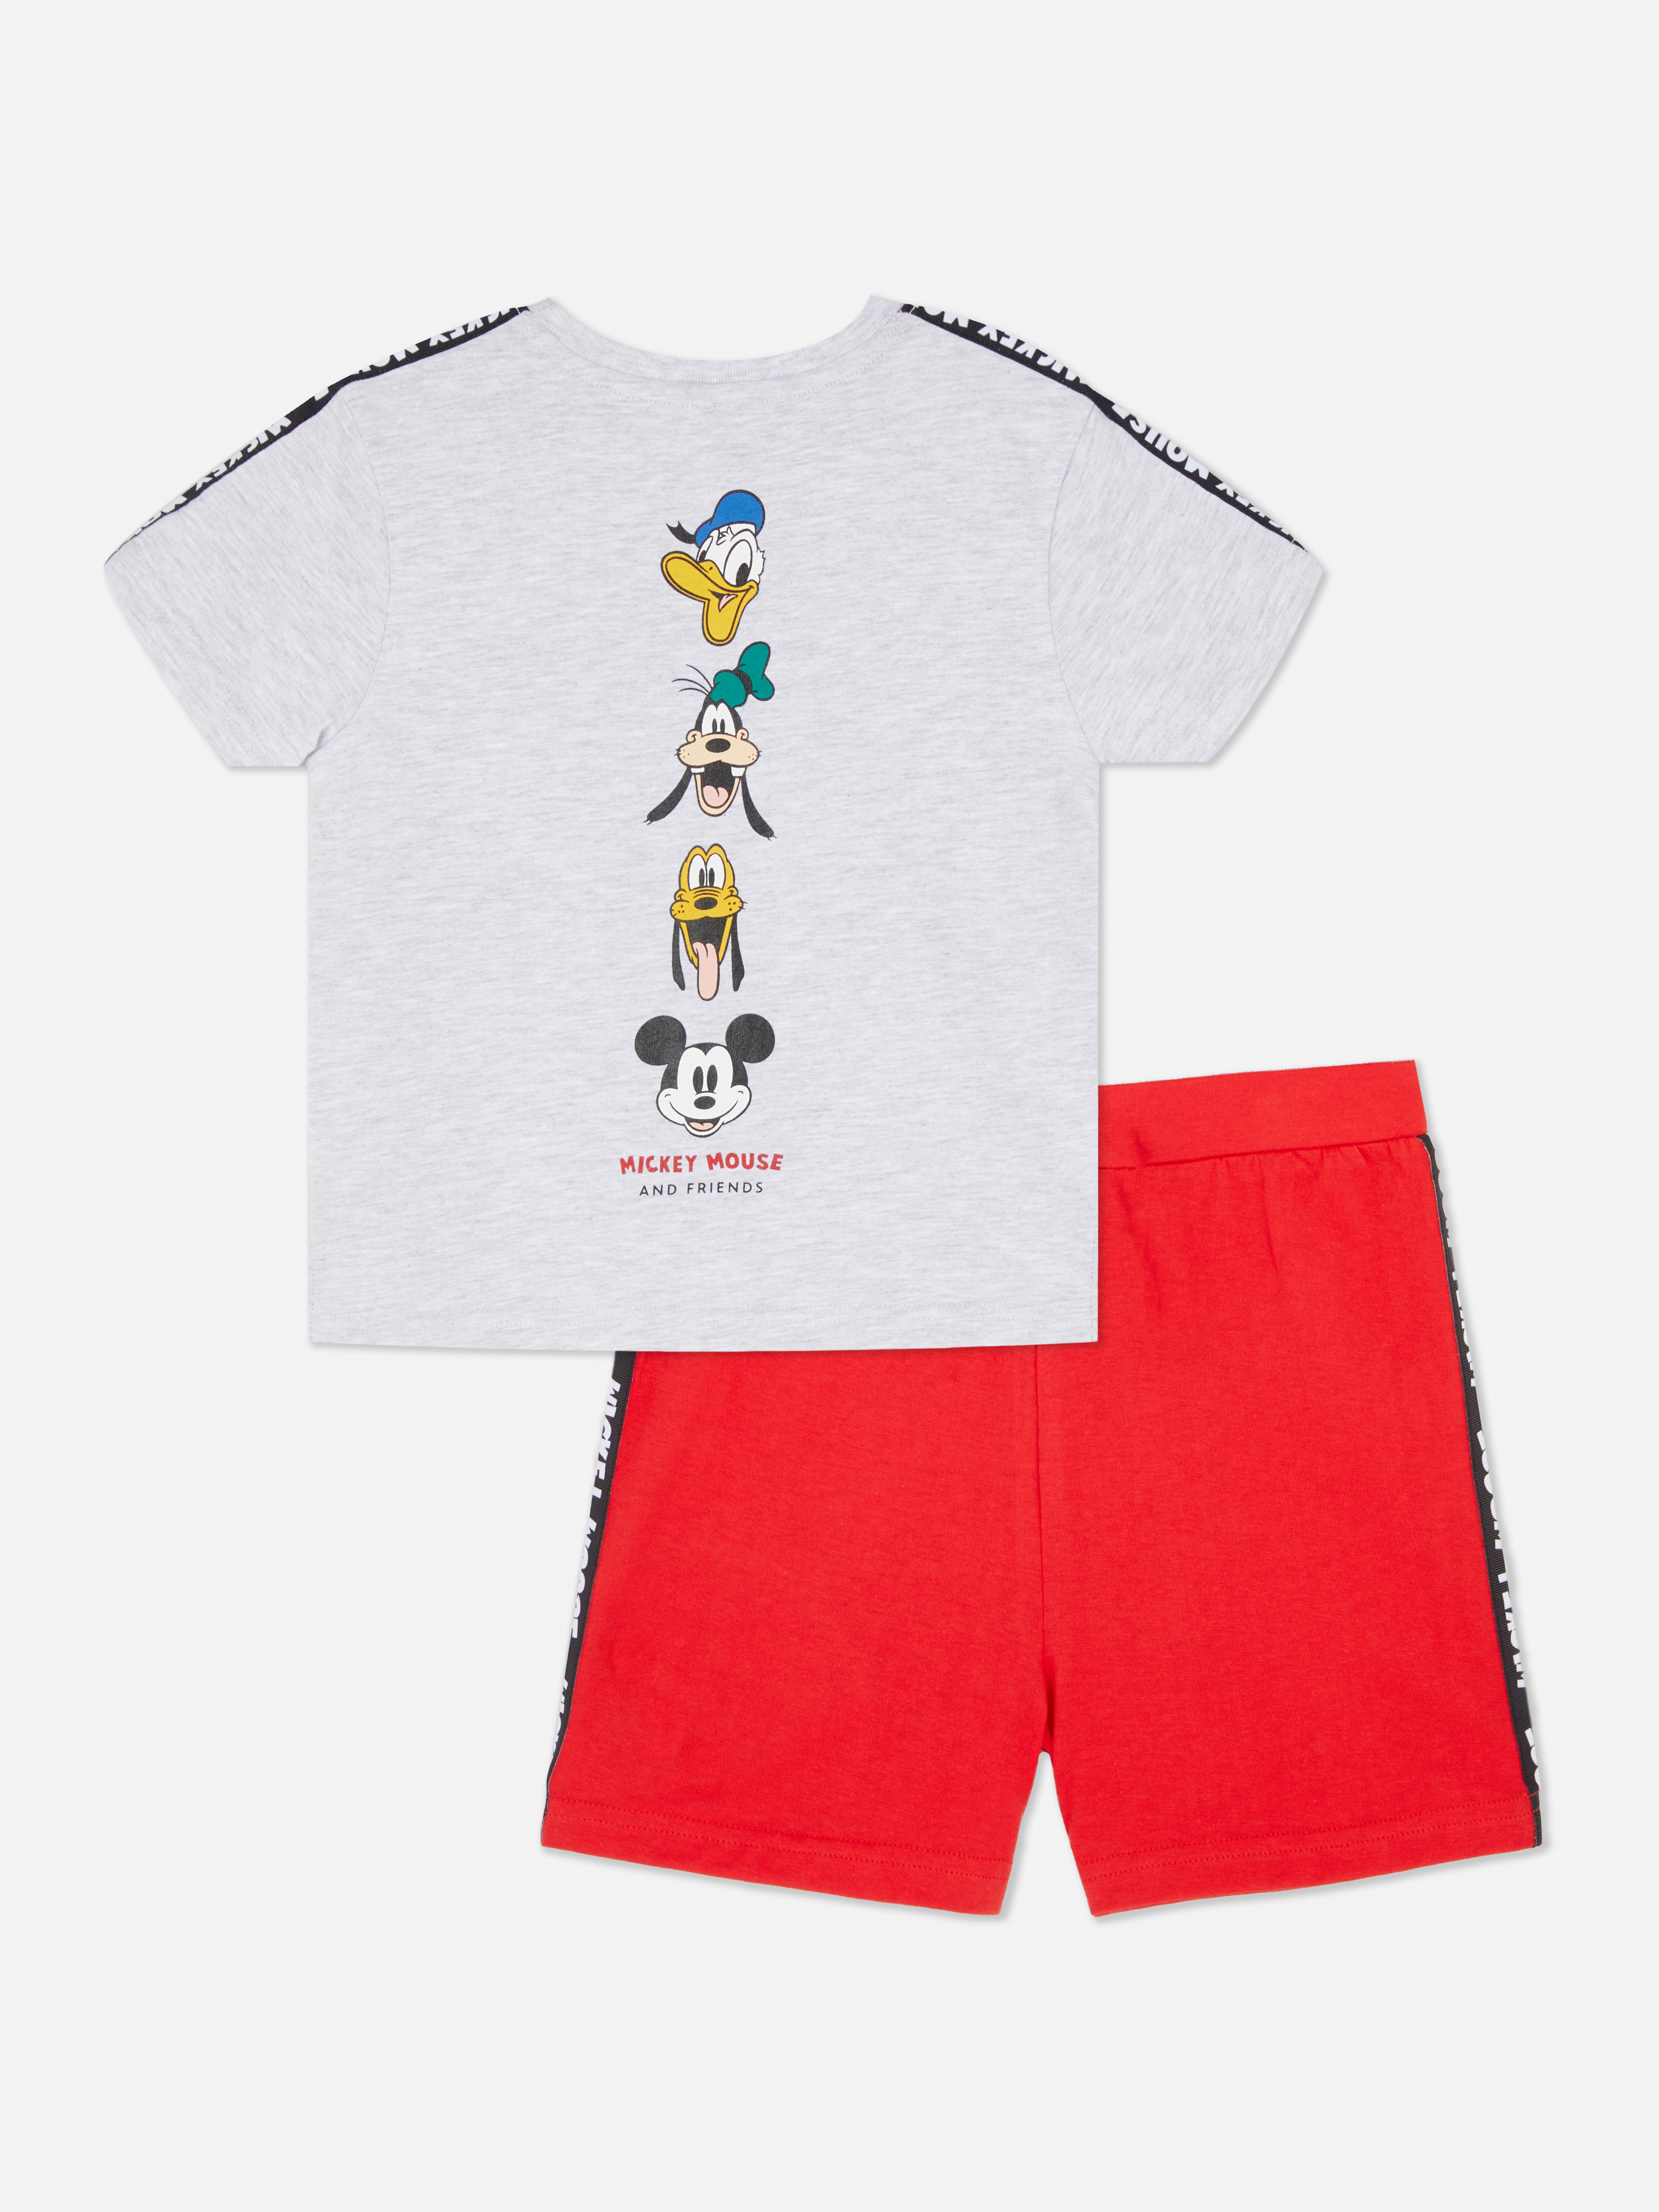 Disney's Mickey Mouse T-Shirt and Shorts Set